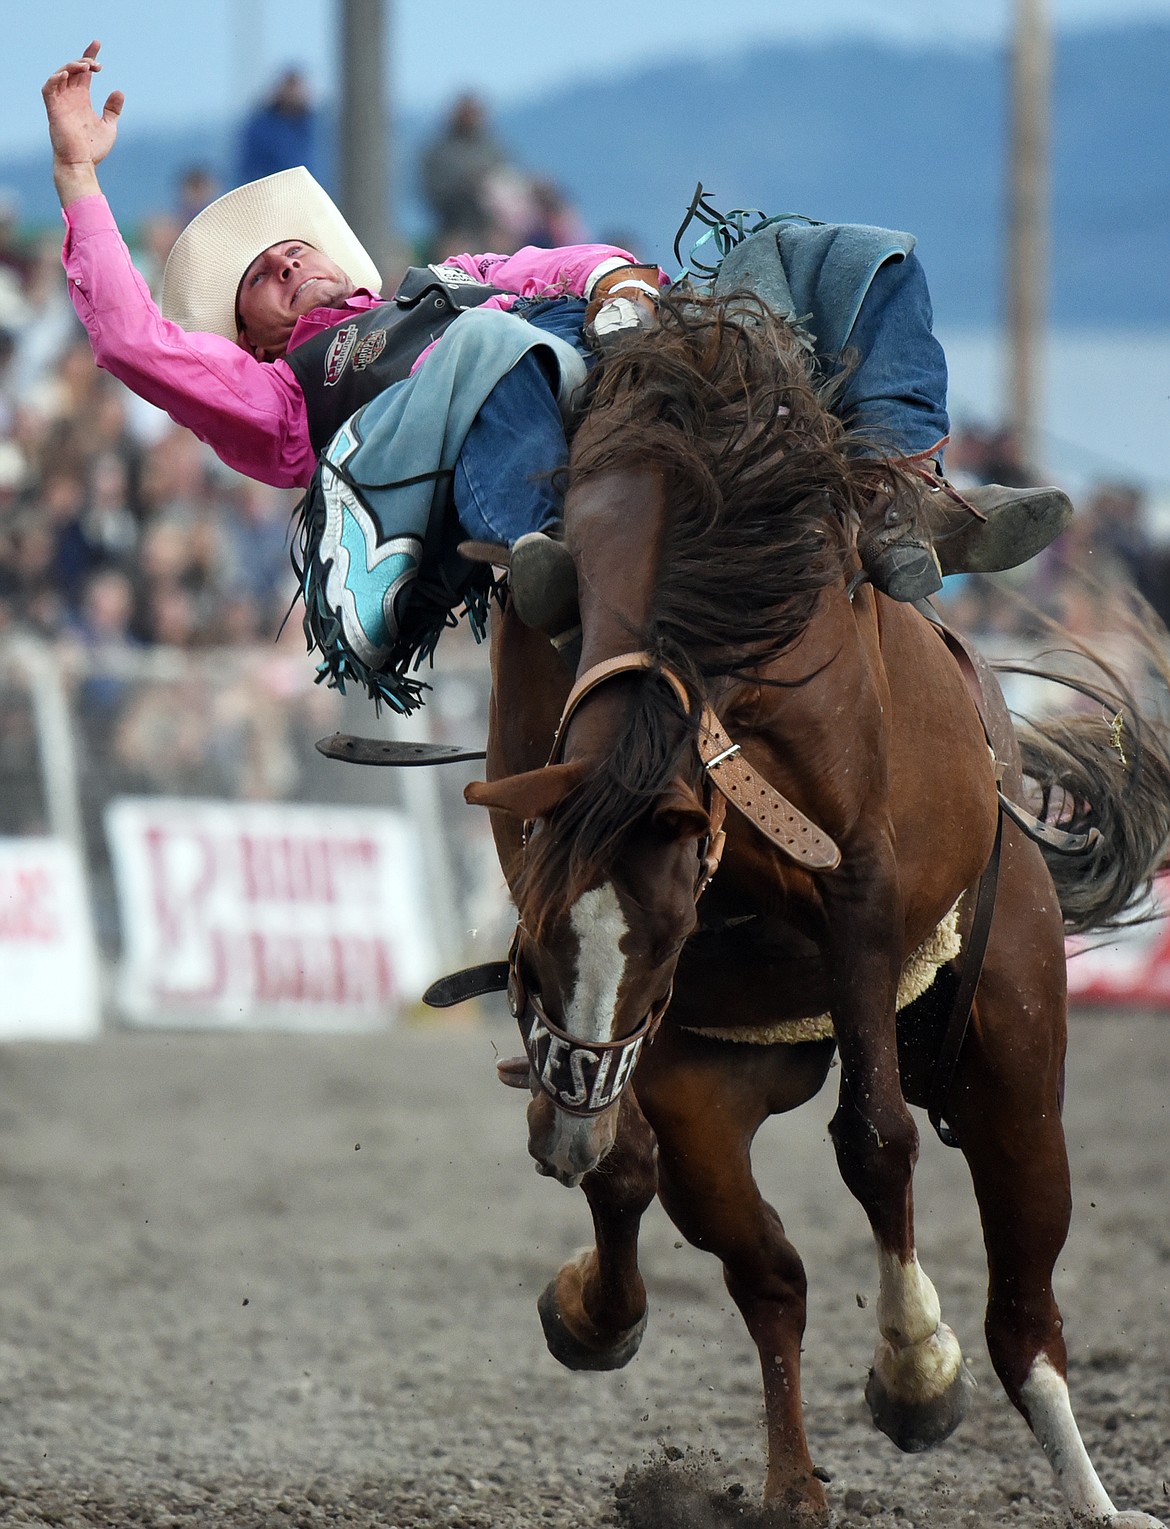 Trenten Montero, from Winnemucca, Nev., holds on to his horse Double Dippin' during bareback riding at the Northwest Montana Fair PRCA Rodeo at the Flathead County Fairgrounds on Friday. (Casey Kreider/Daily Inter Lake)